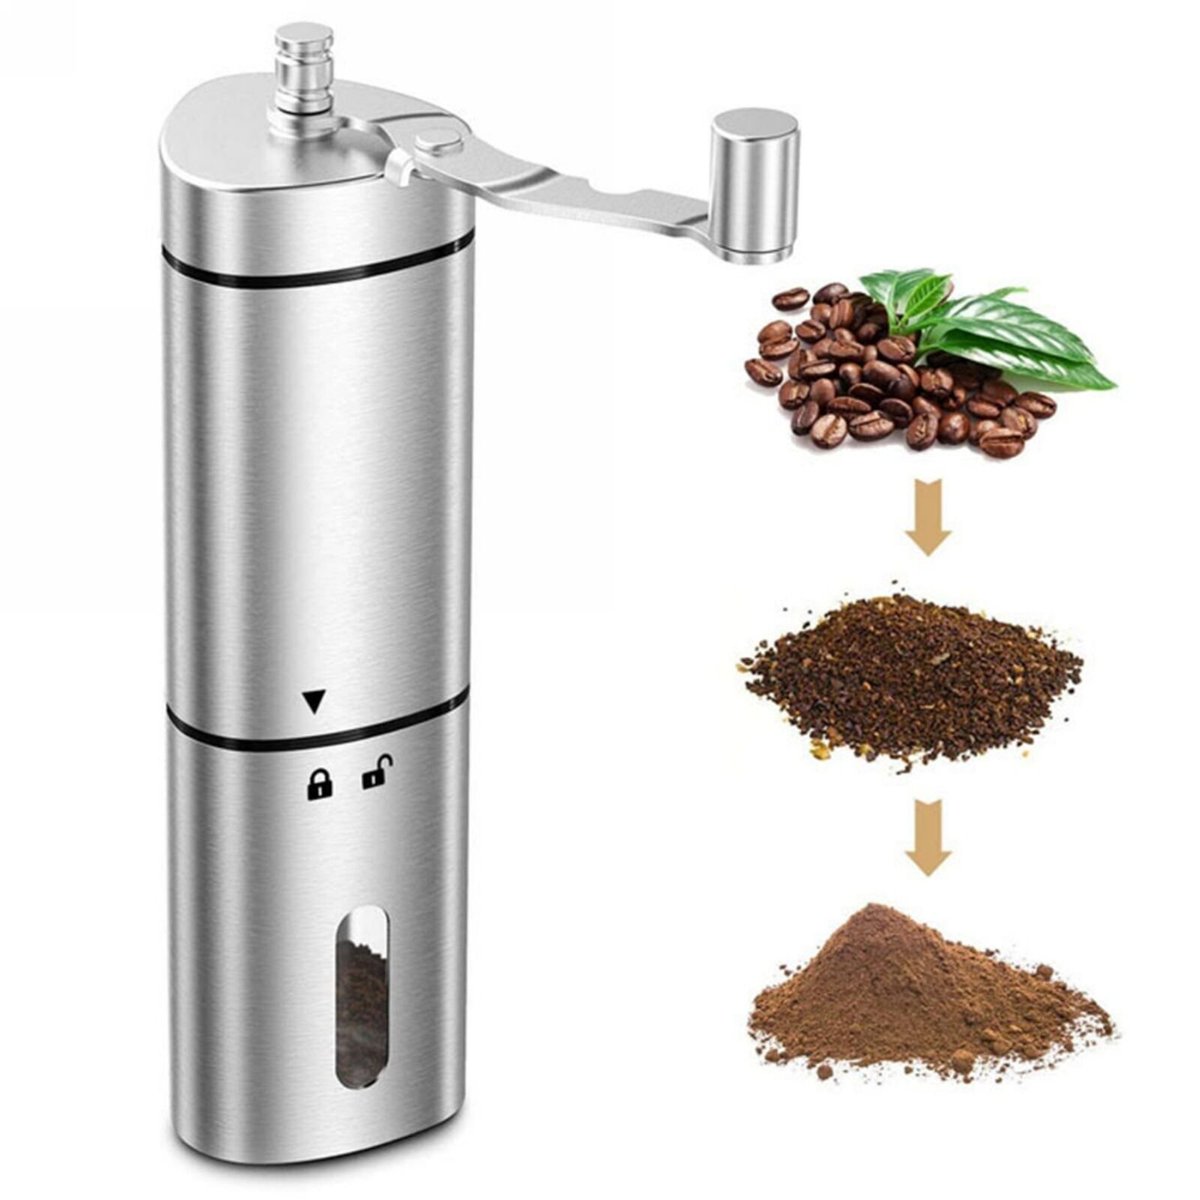 Hand Crank Pepper Conical Burr Grinder 

To see the PRICE, please go to:
Steelhttps://www.pepperkitchenshop.com/products/view/id/3865

#kitchengadgets #kitchentools #kitchenware #kitchenutensils #grater #peeler #applecorer #doughcutter #pizzacutter #eggseparator #teastrainer